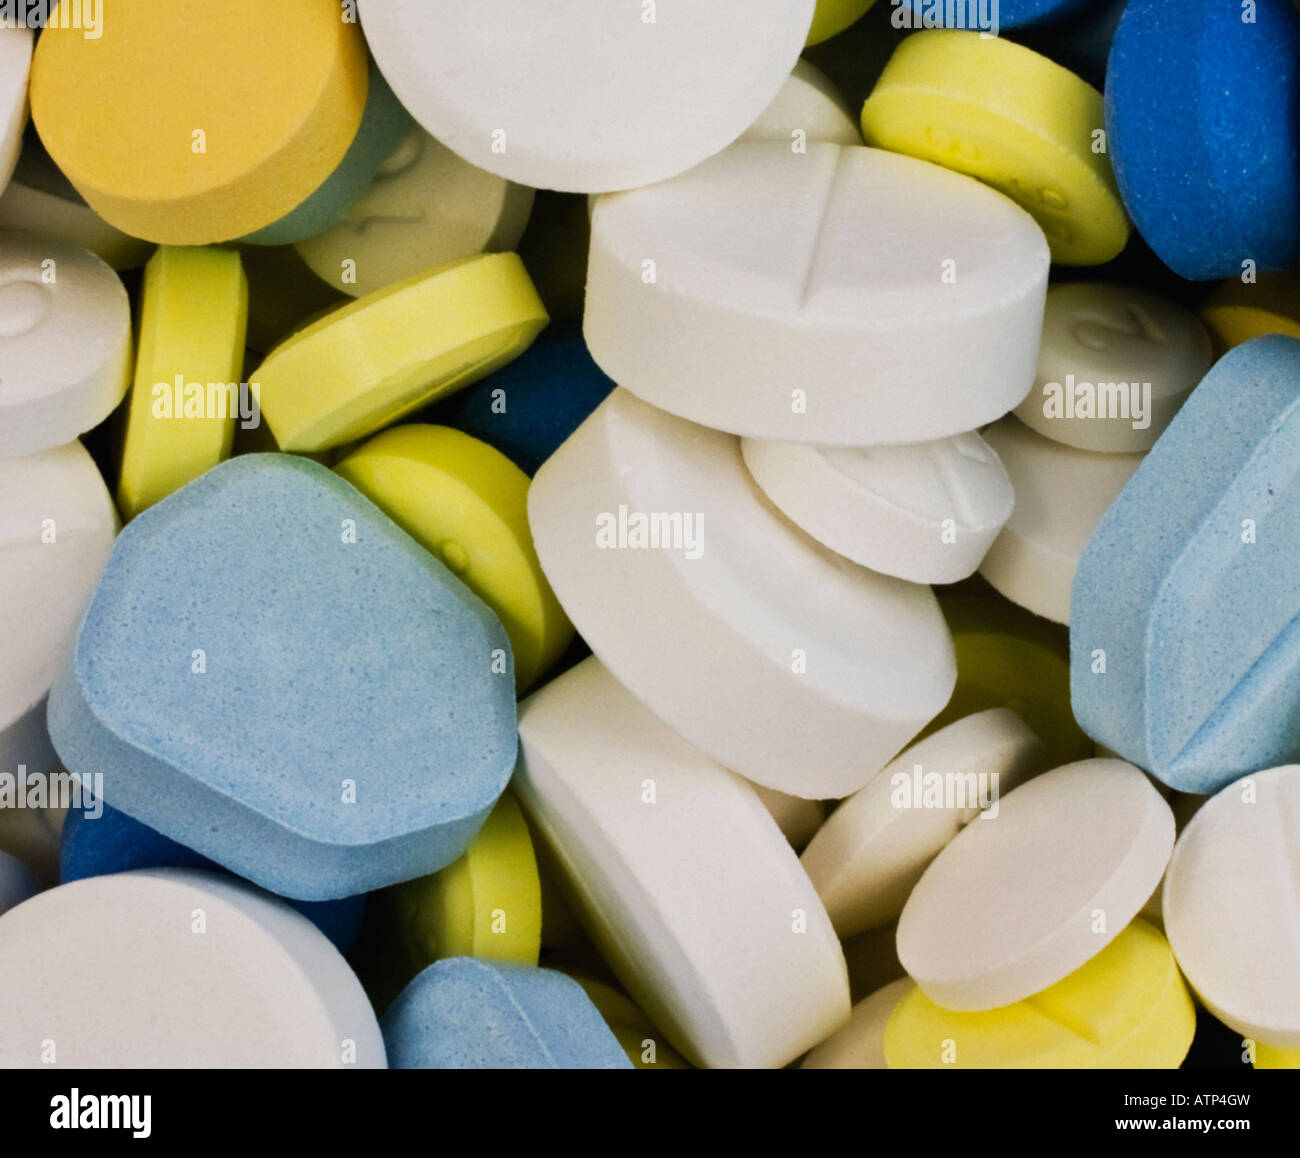 psychiatric drugs and pain killers Stock Photo